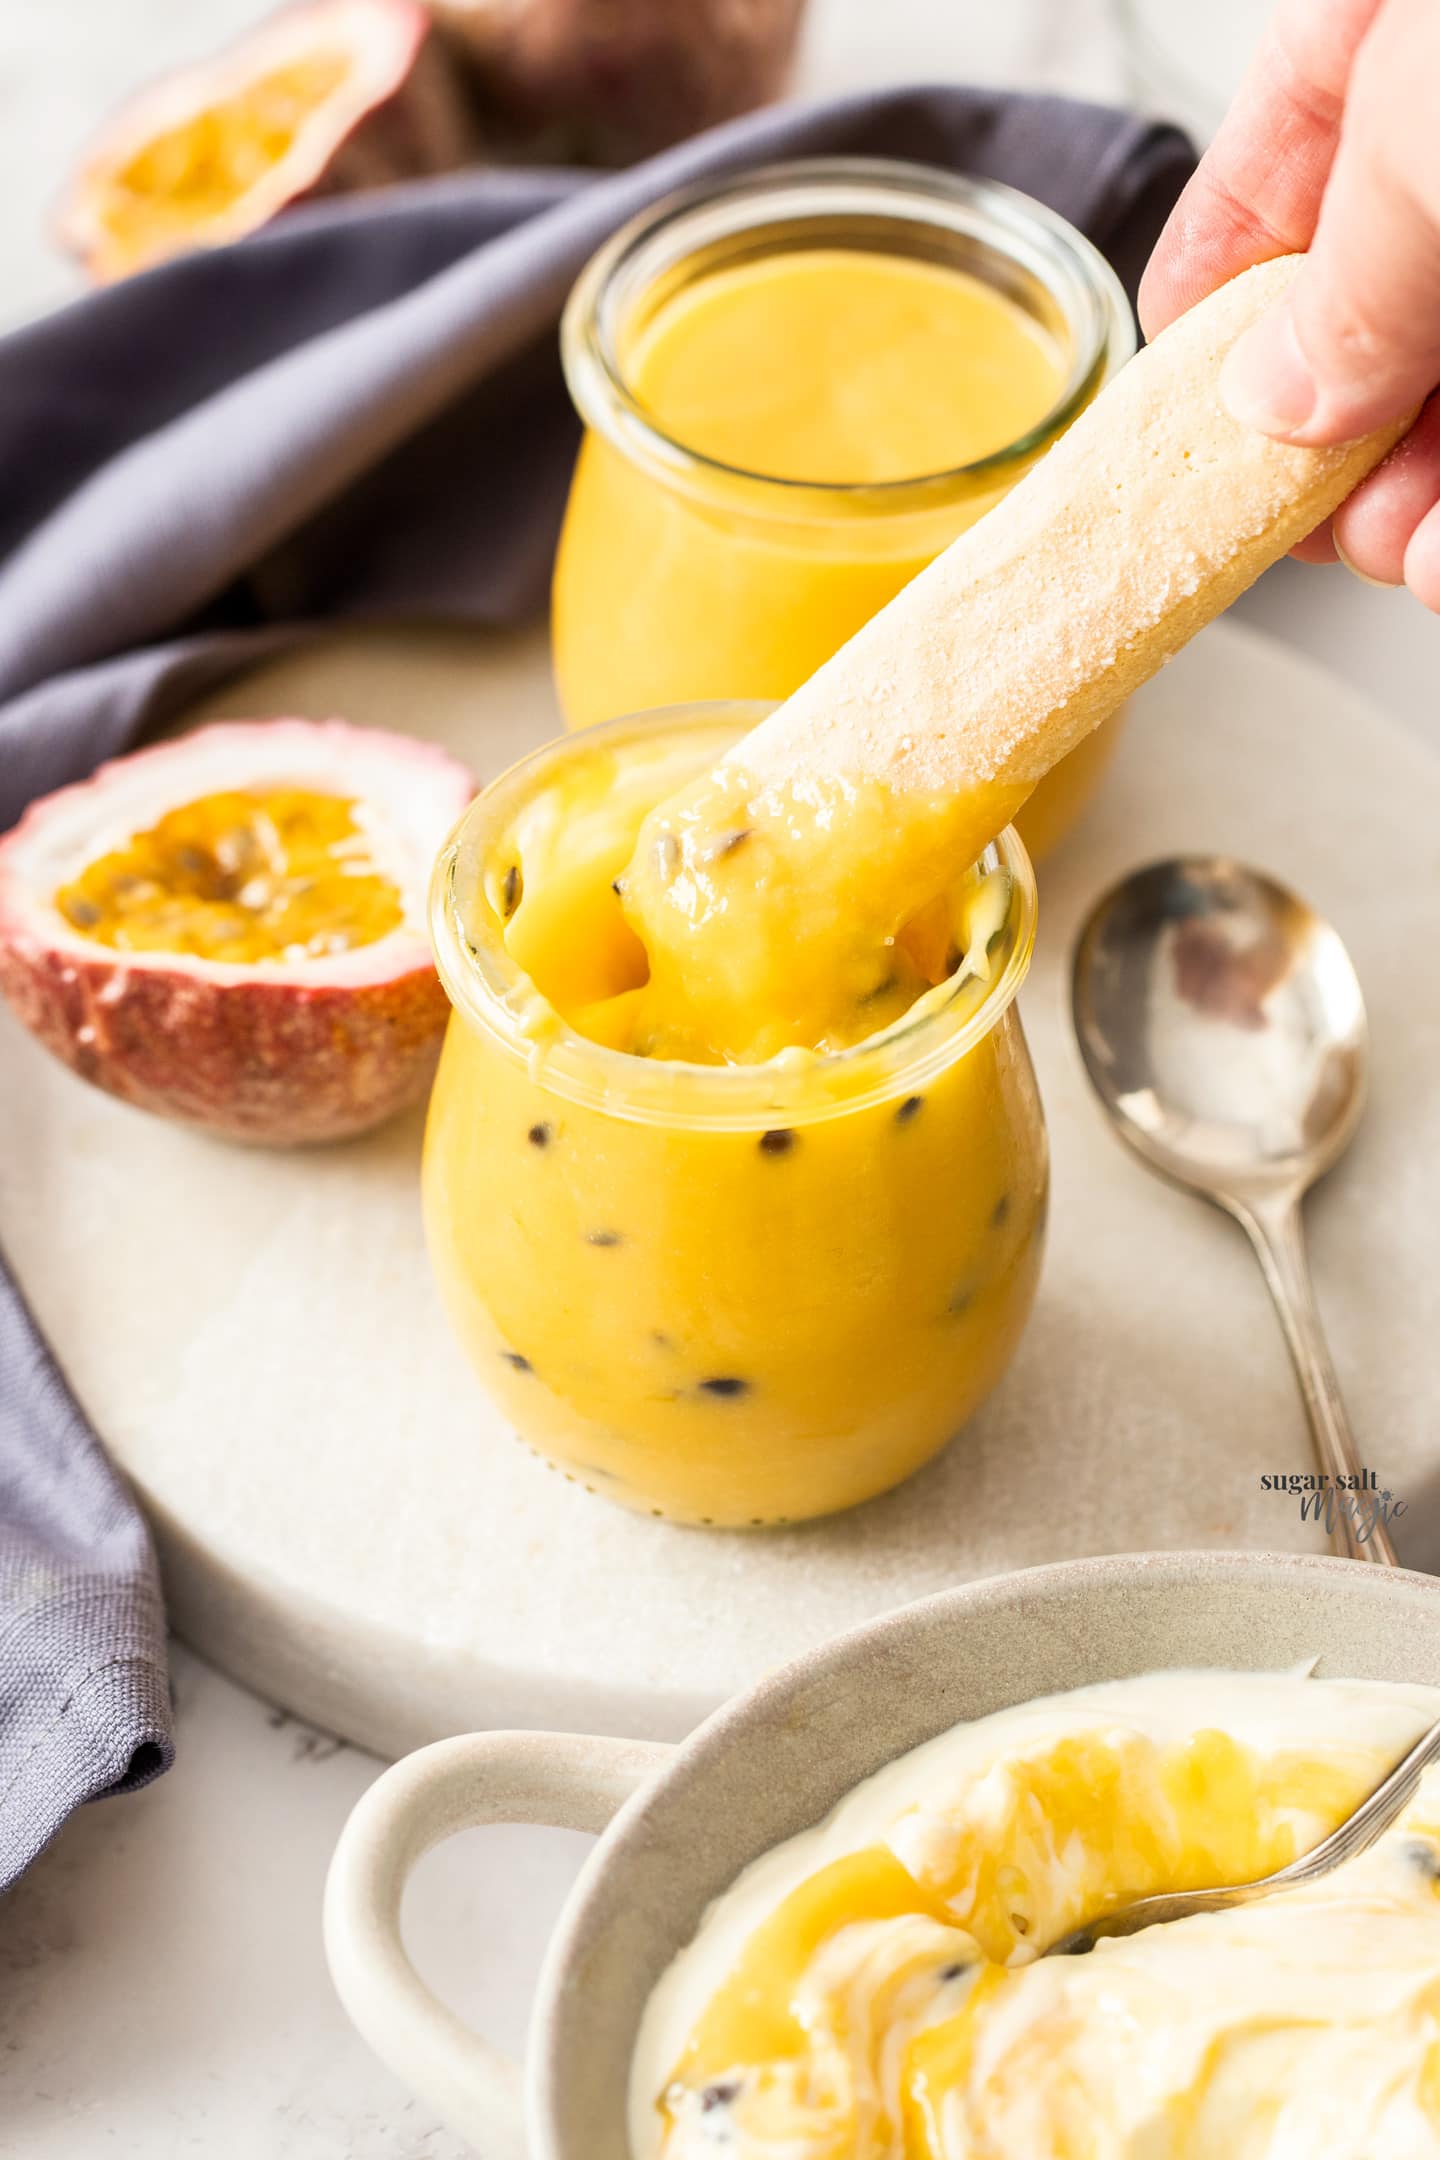 A sponge finger being dipped into passionfruit curd.